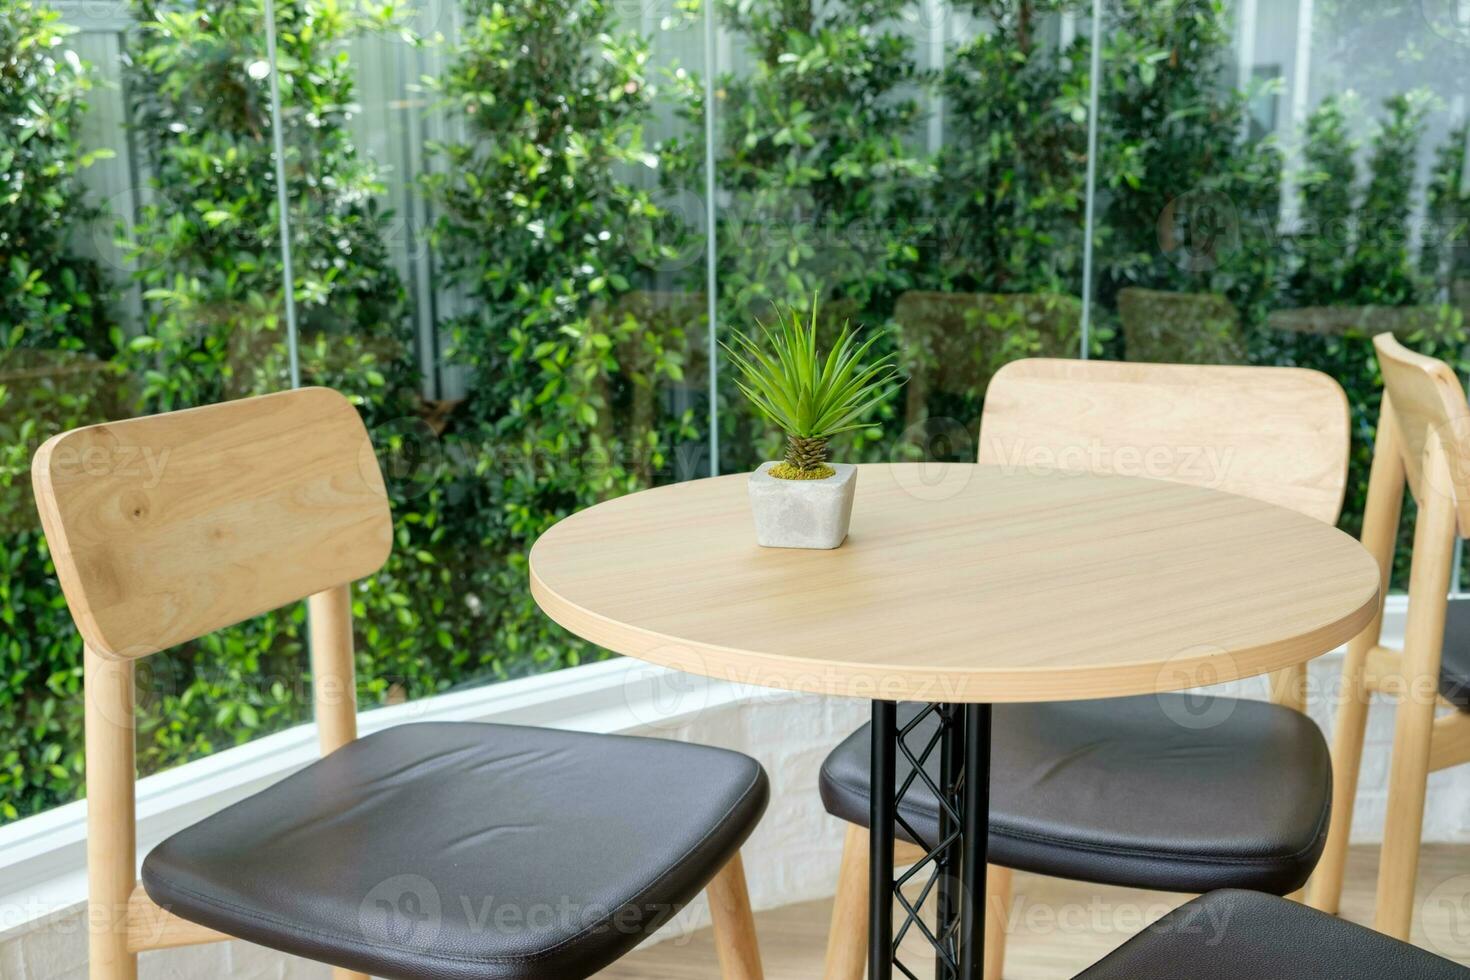 Table with chairs decorative garden in coffee shop photo